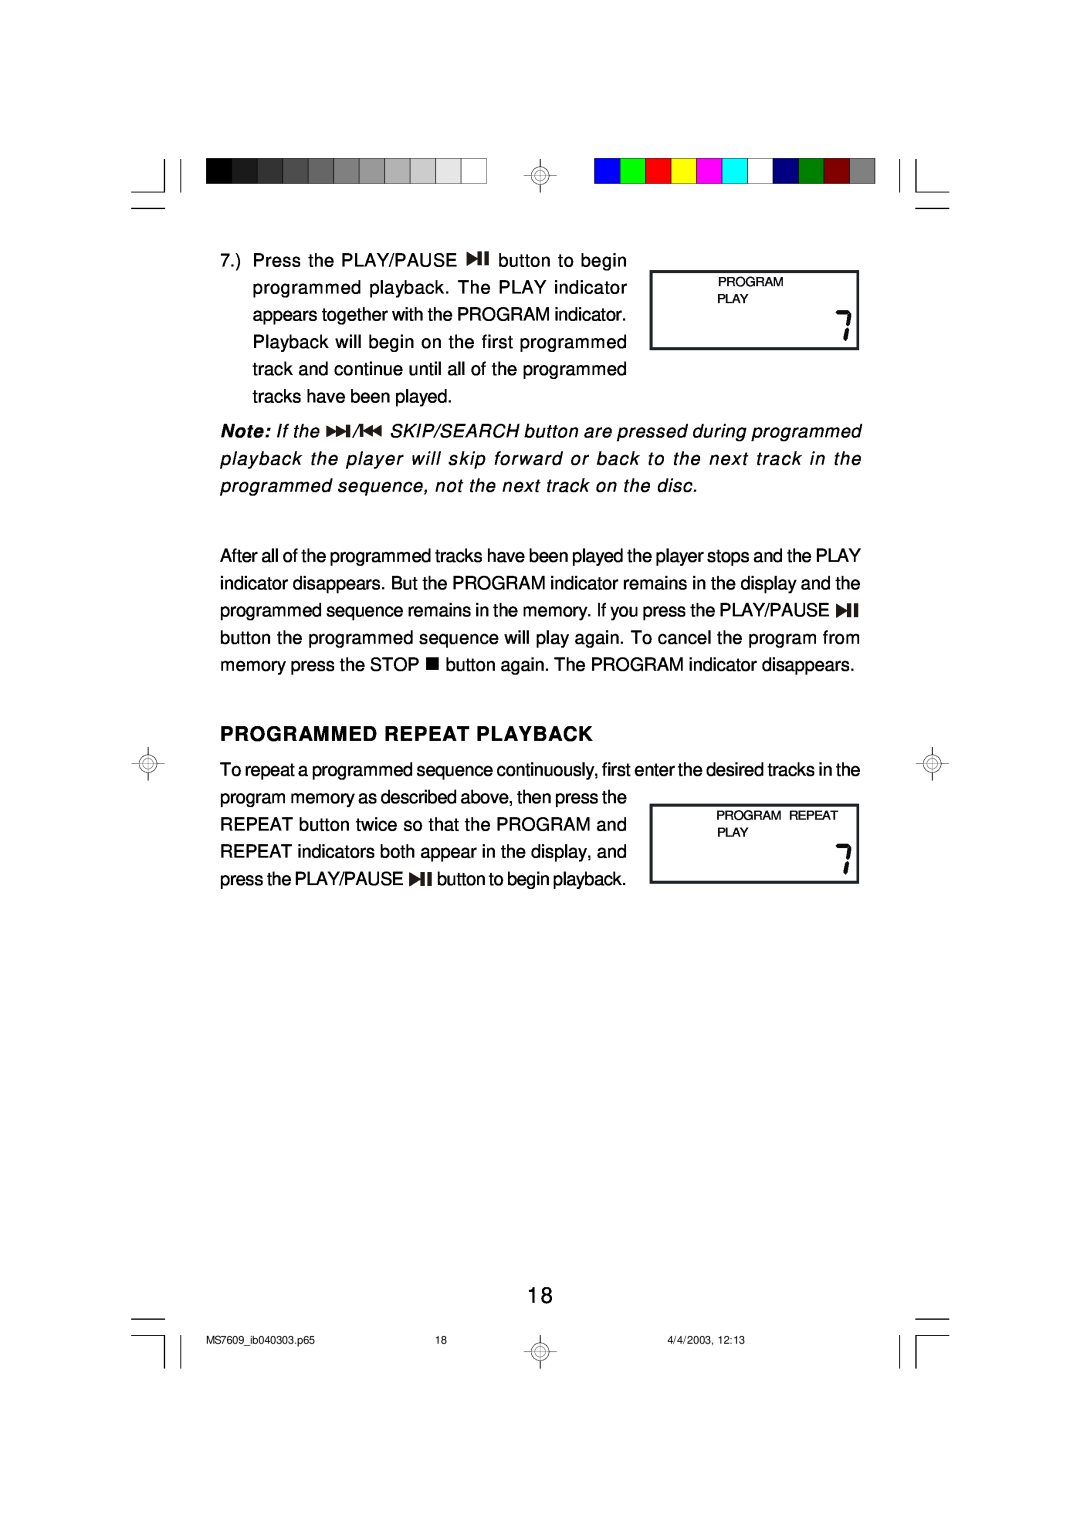 Emerson MS7609 owner manual Programmed Repeat Playback 